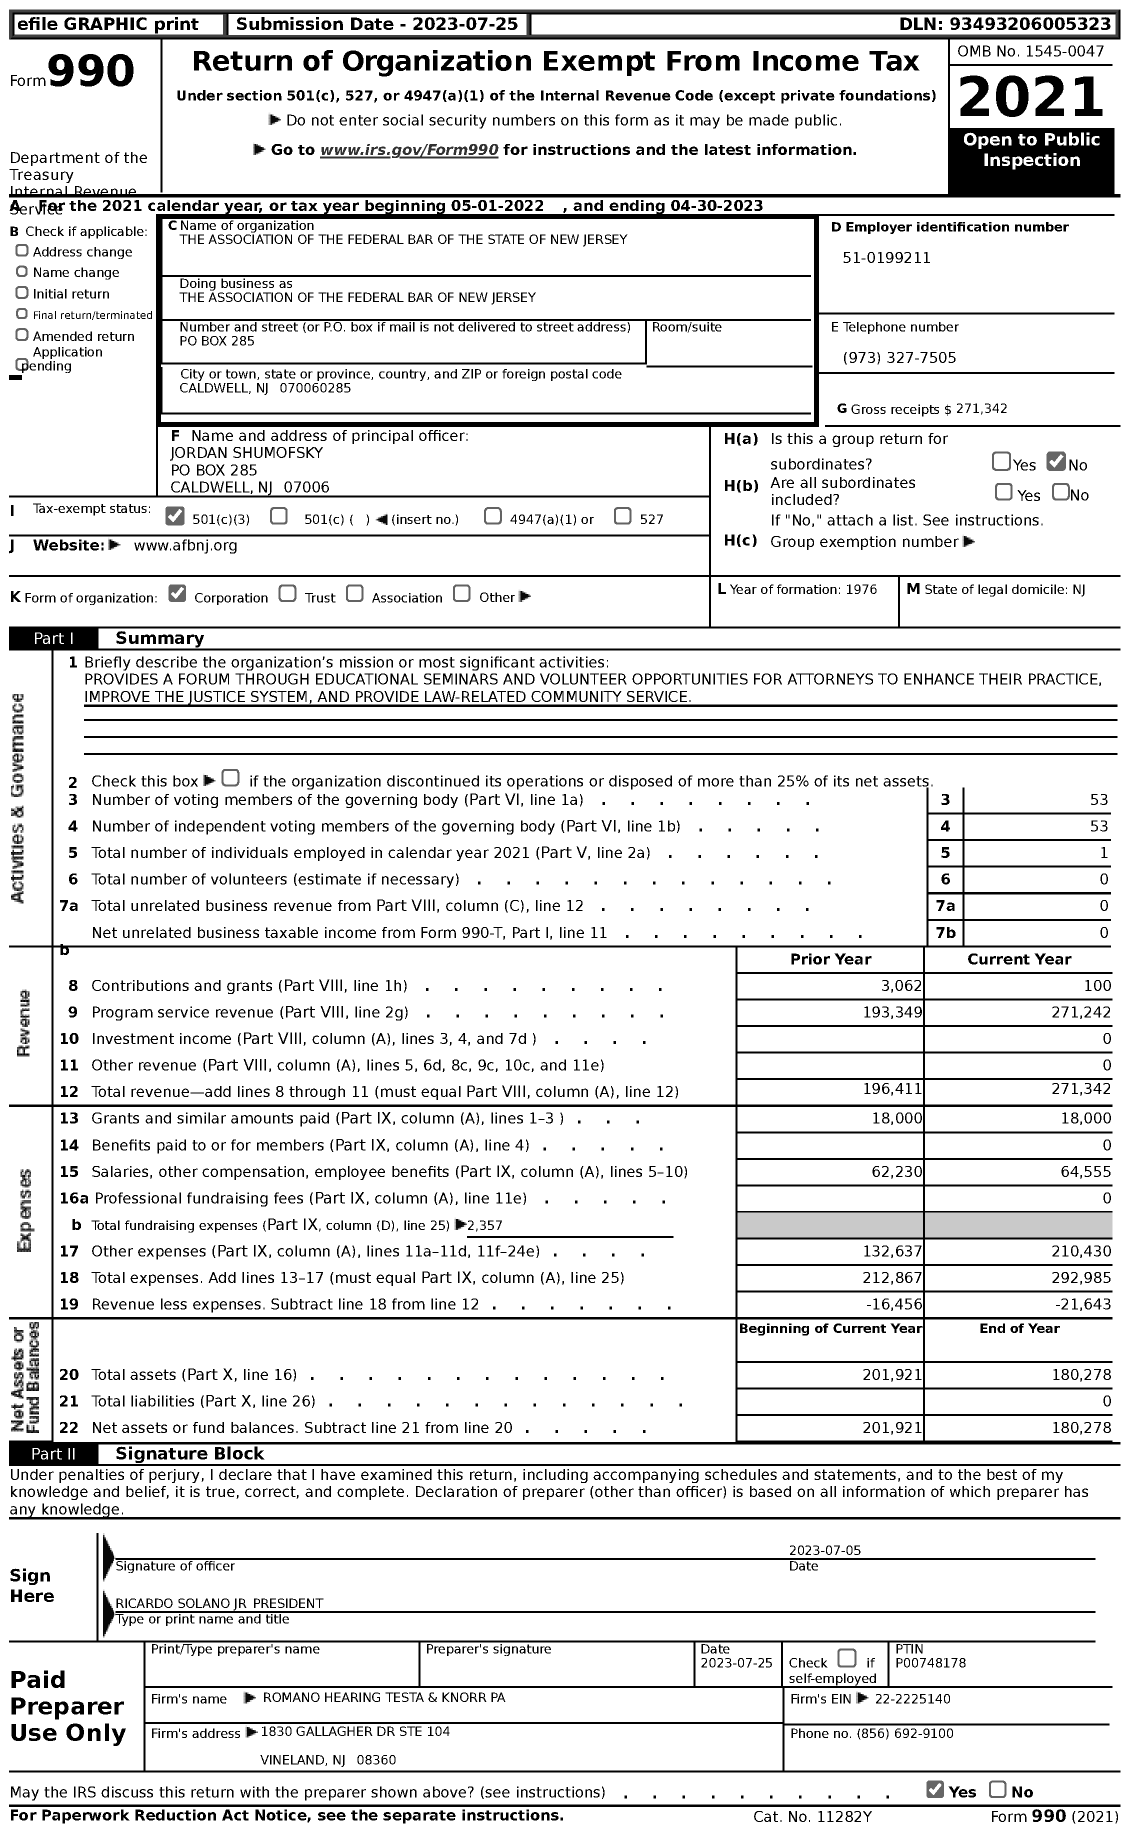 Image of first page of 2022 Form 990 for The Association of the Federal Bar of New Jersey